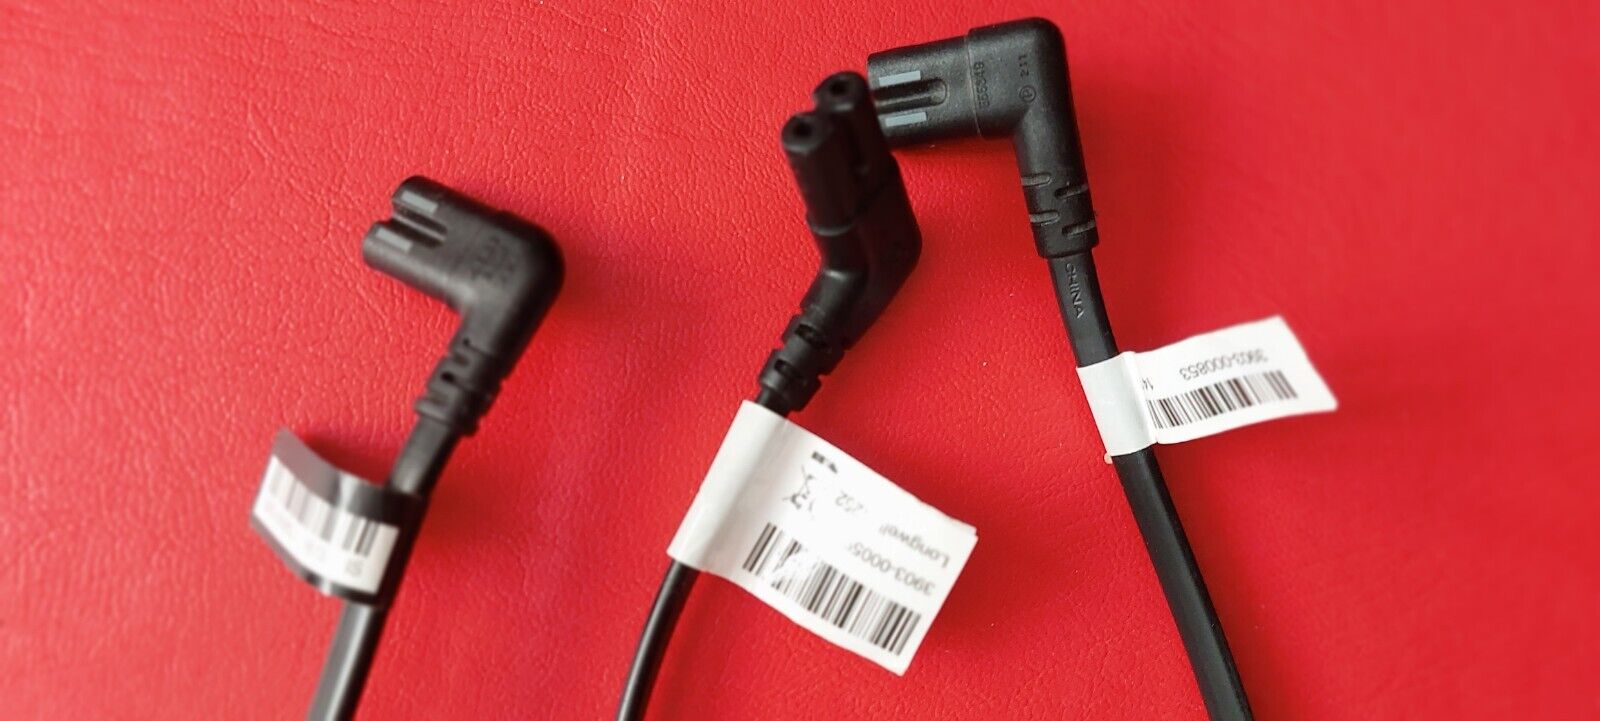 LOT OF 2 LONGWELL AND 1 ISHENG BRAND POWER CORD 90 DEGREE ELBOW PLUG